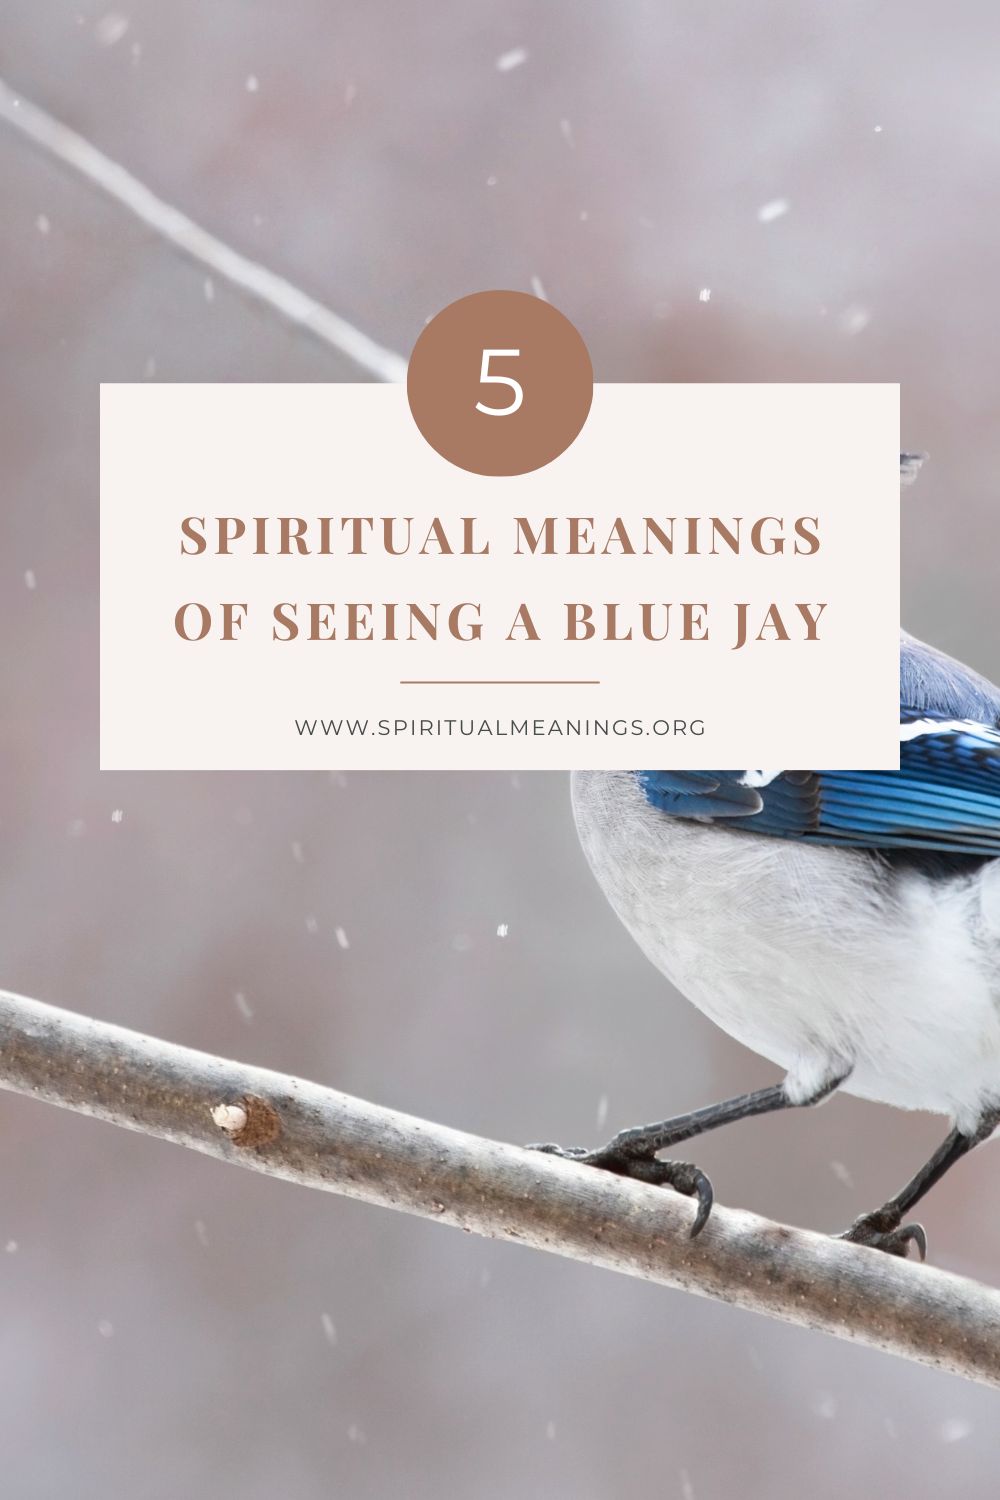 What Does it Mean When You See a Blue Jay?